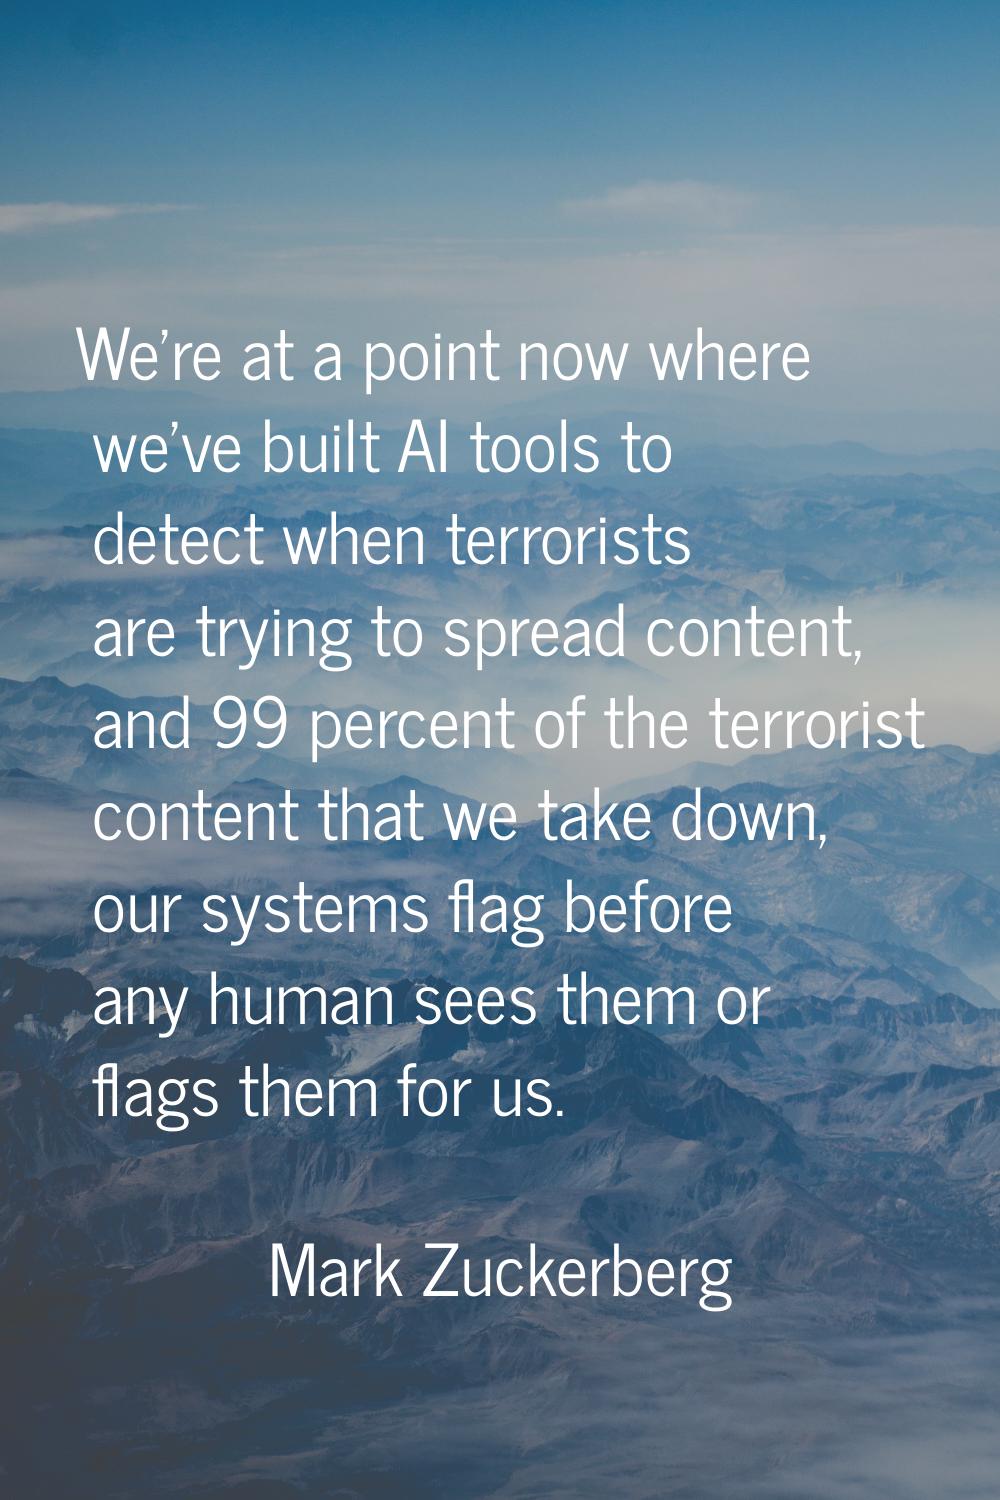 We're at a point now where we've built AI tools to detect when terrorists are trying to spread cont